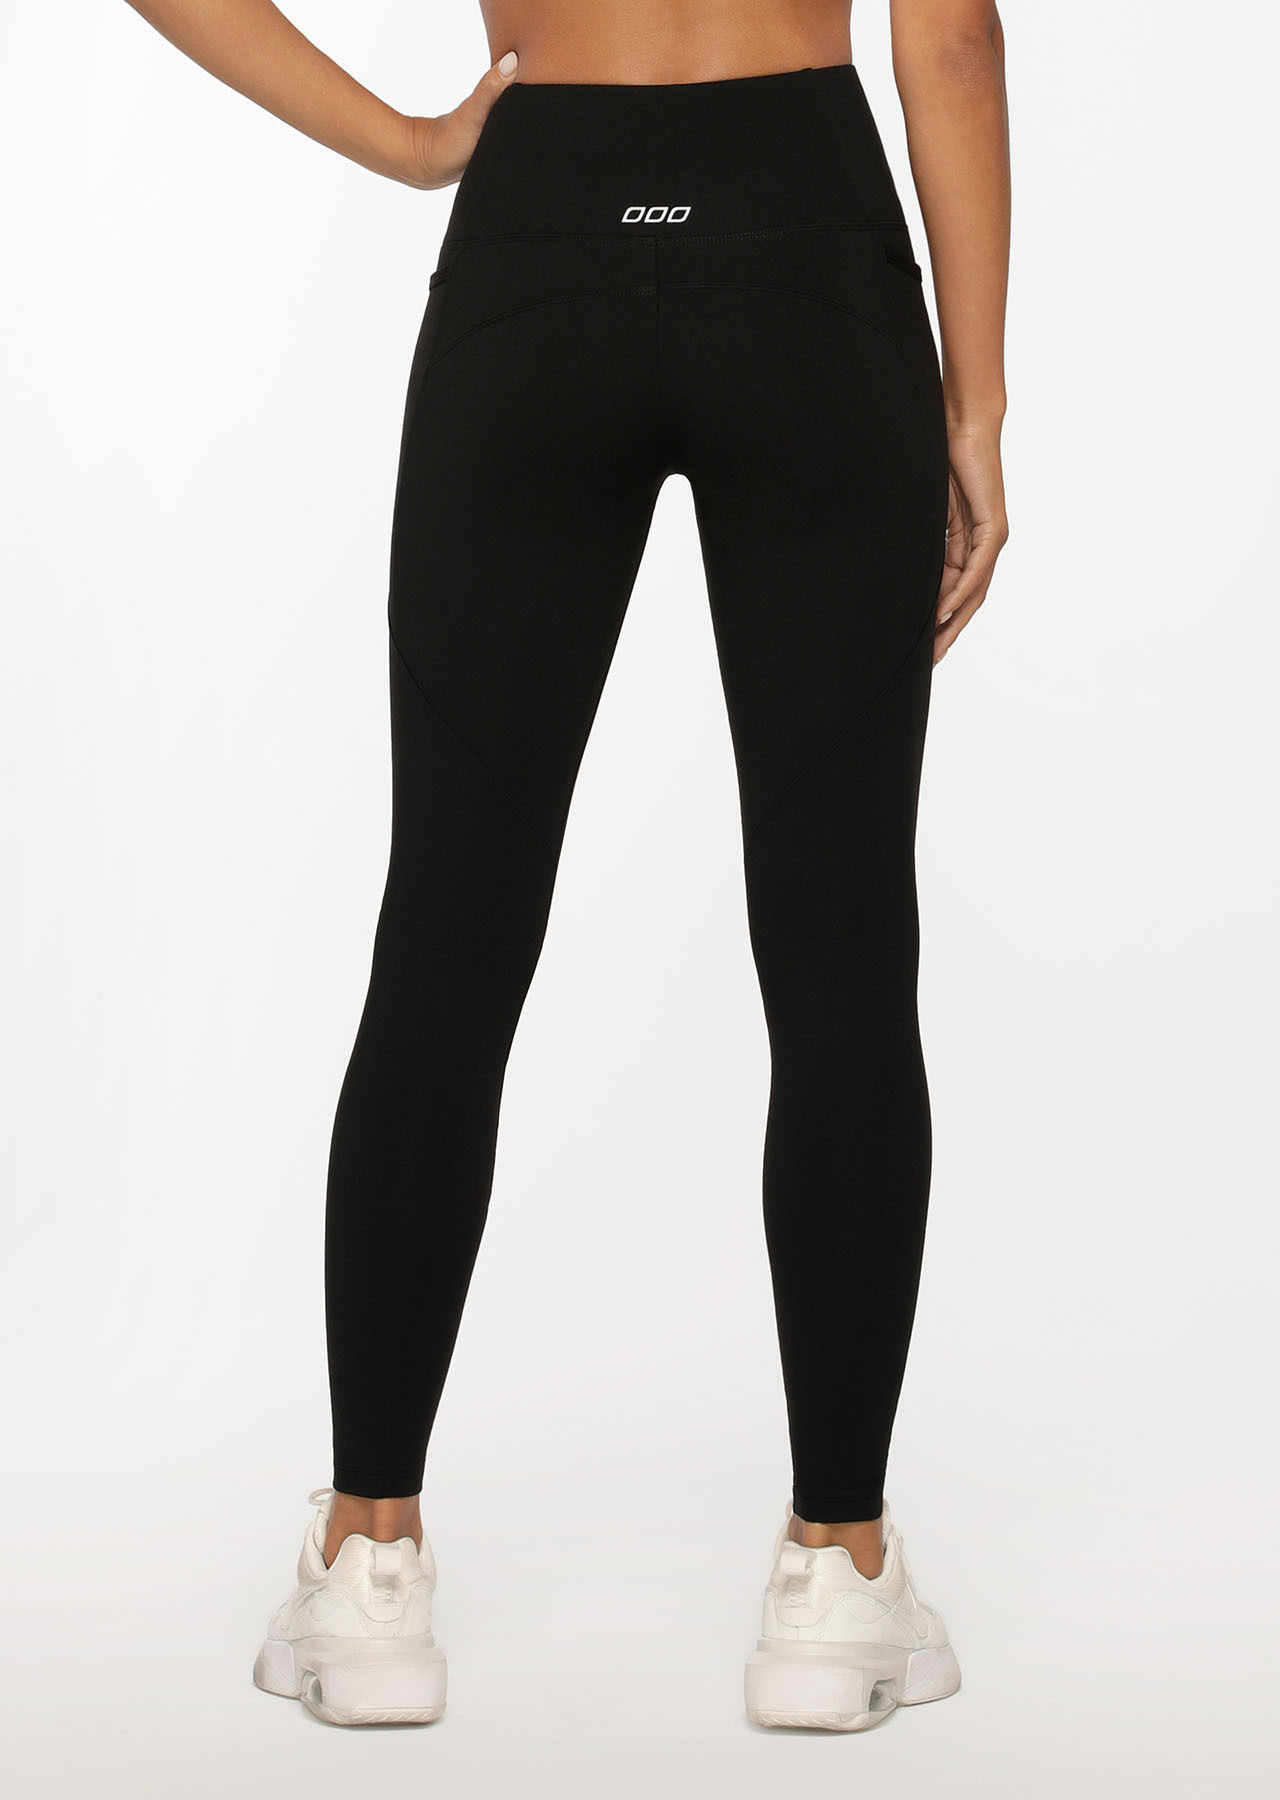 Lululemon Thermal Tights Australia  International Society of Precision  Agriculture